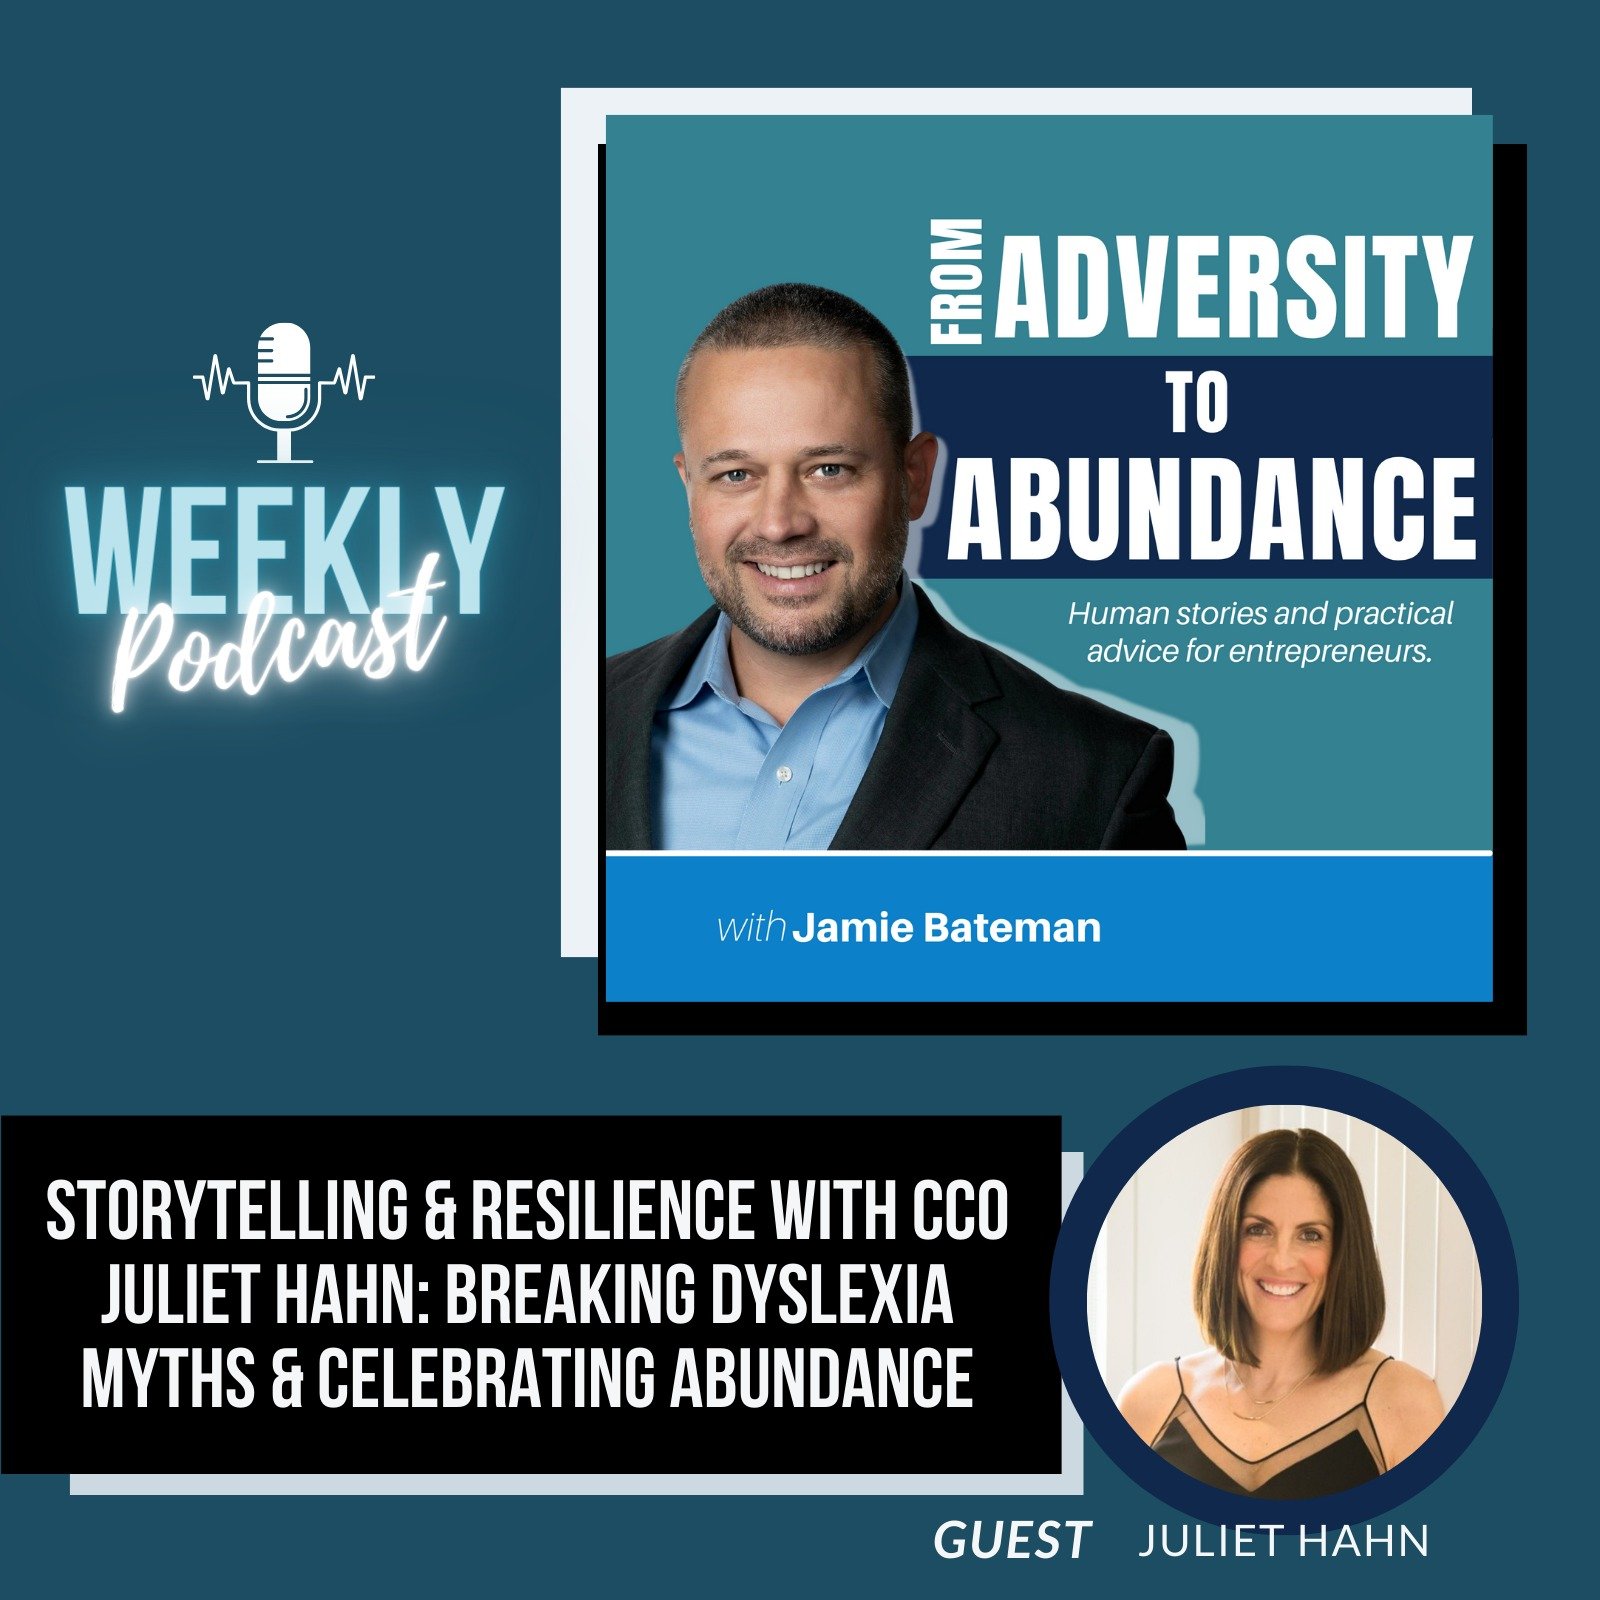 Storytelling & Resilience with CCO Juliet Hahn: Breaking Dyslexia Myths & Celebrating Abundance